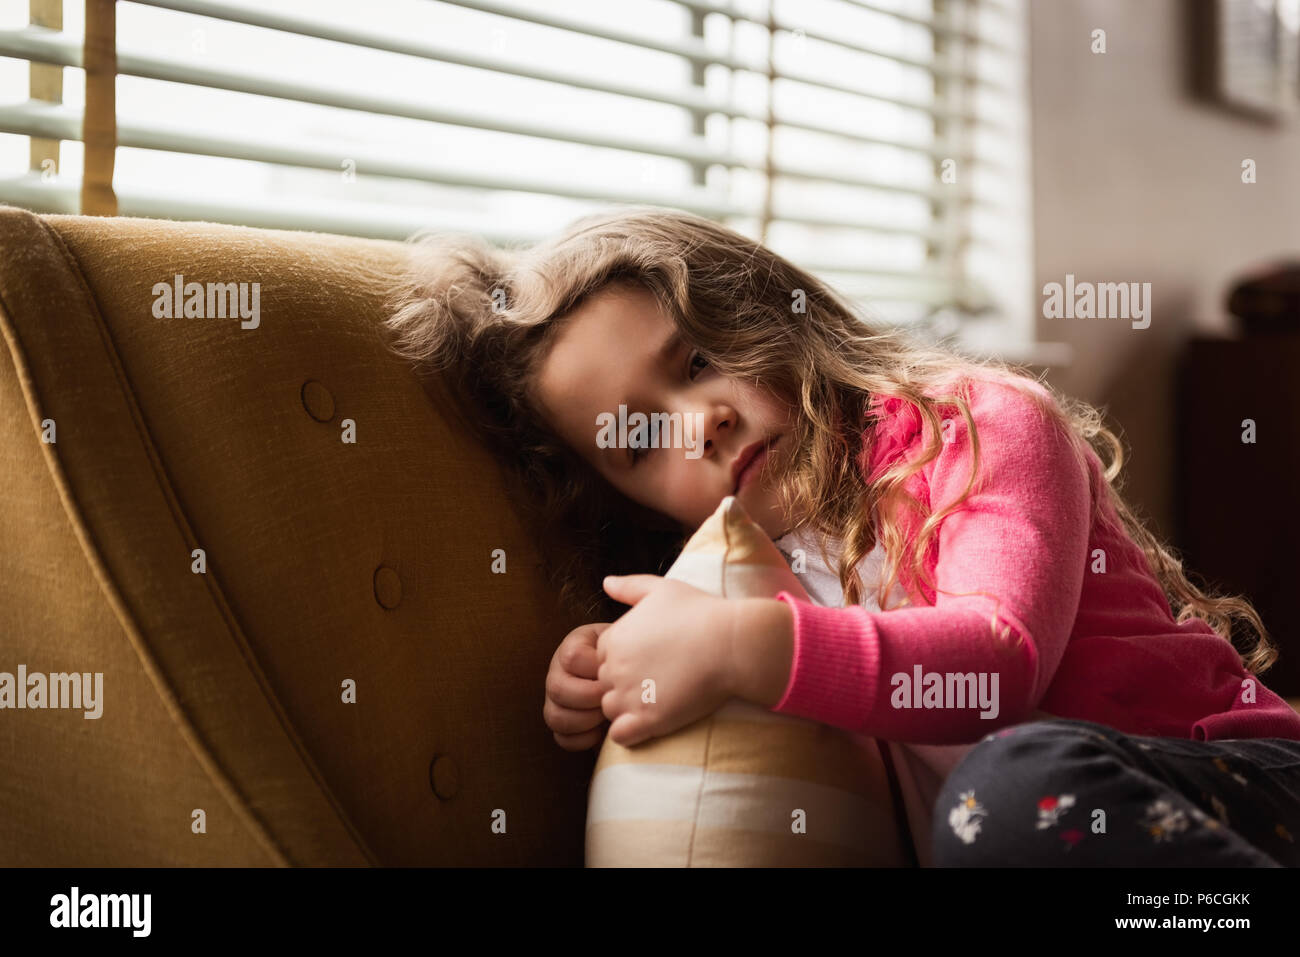 Girl relaxing on sofa in living room Banque D'Images